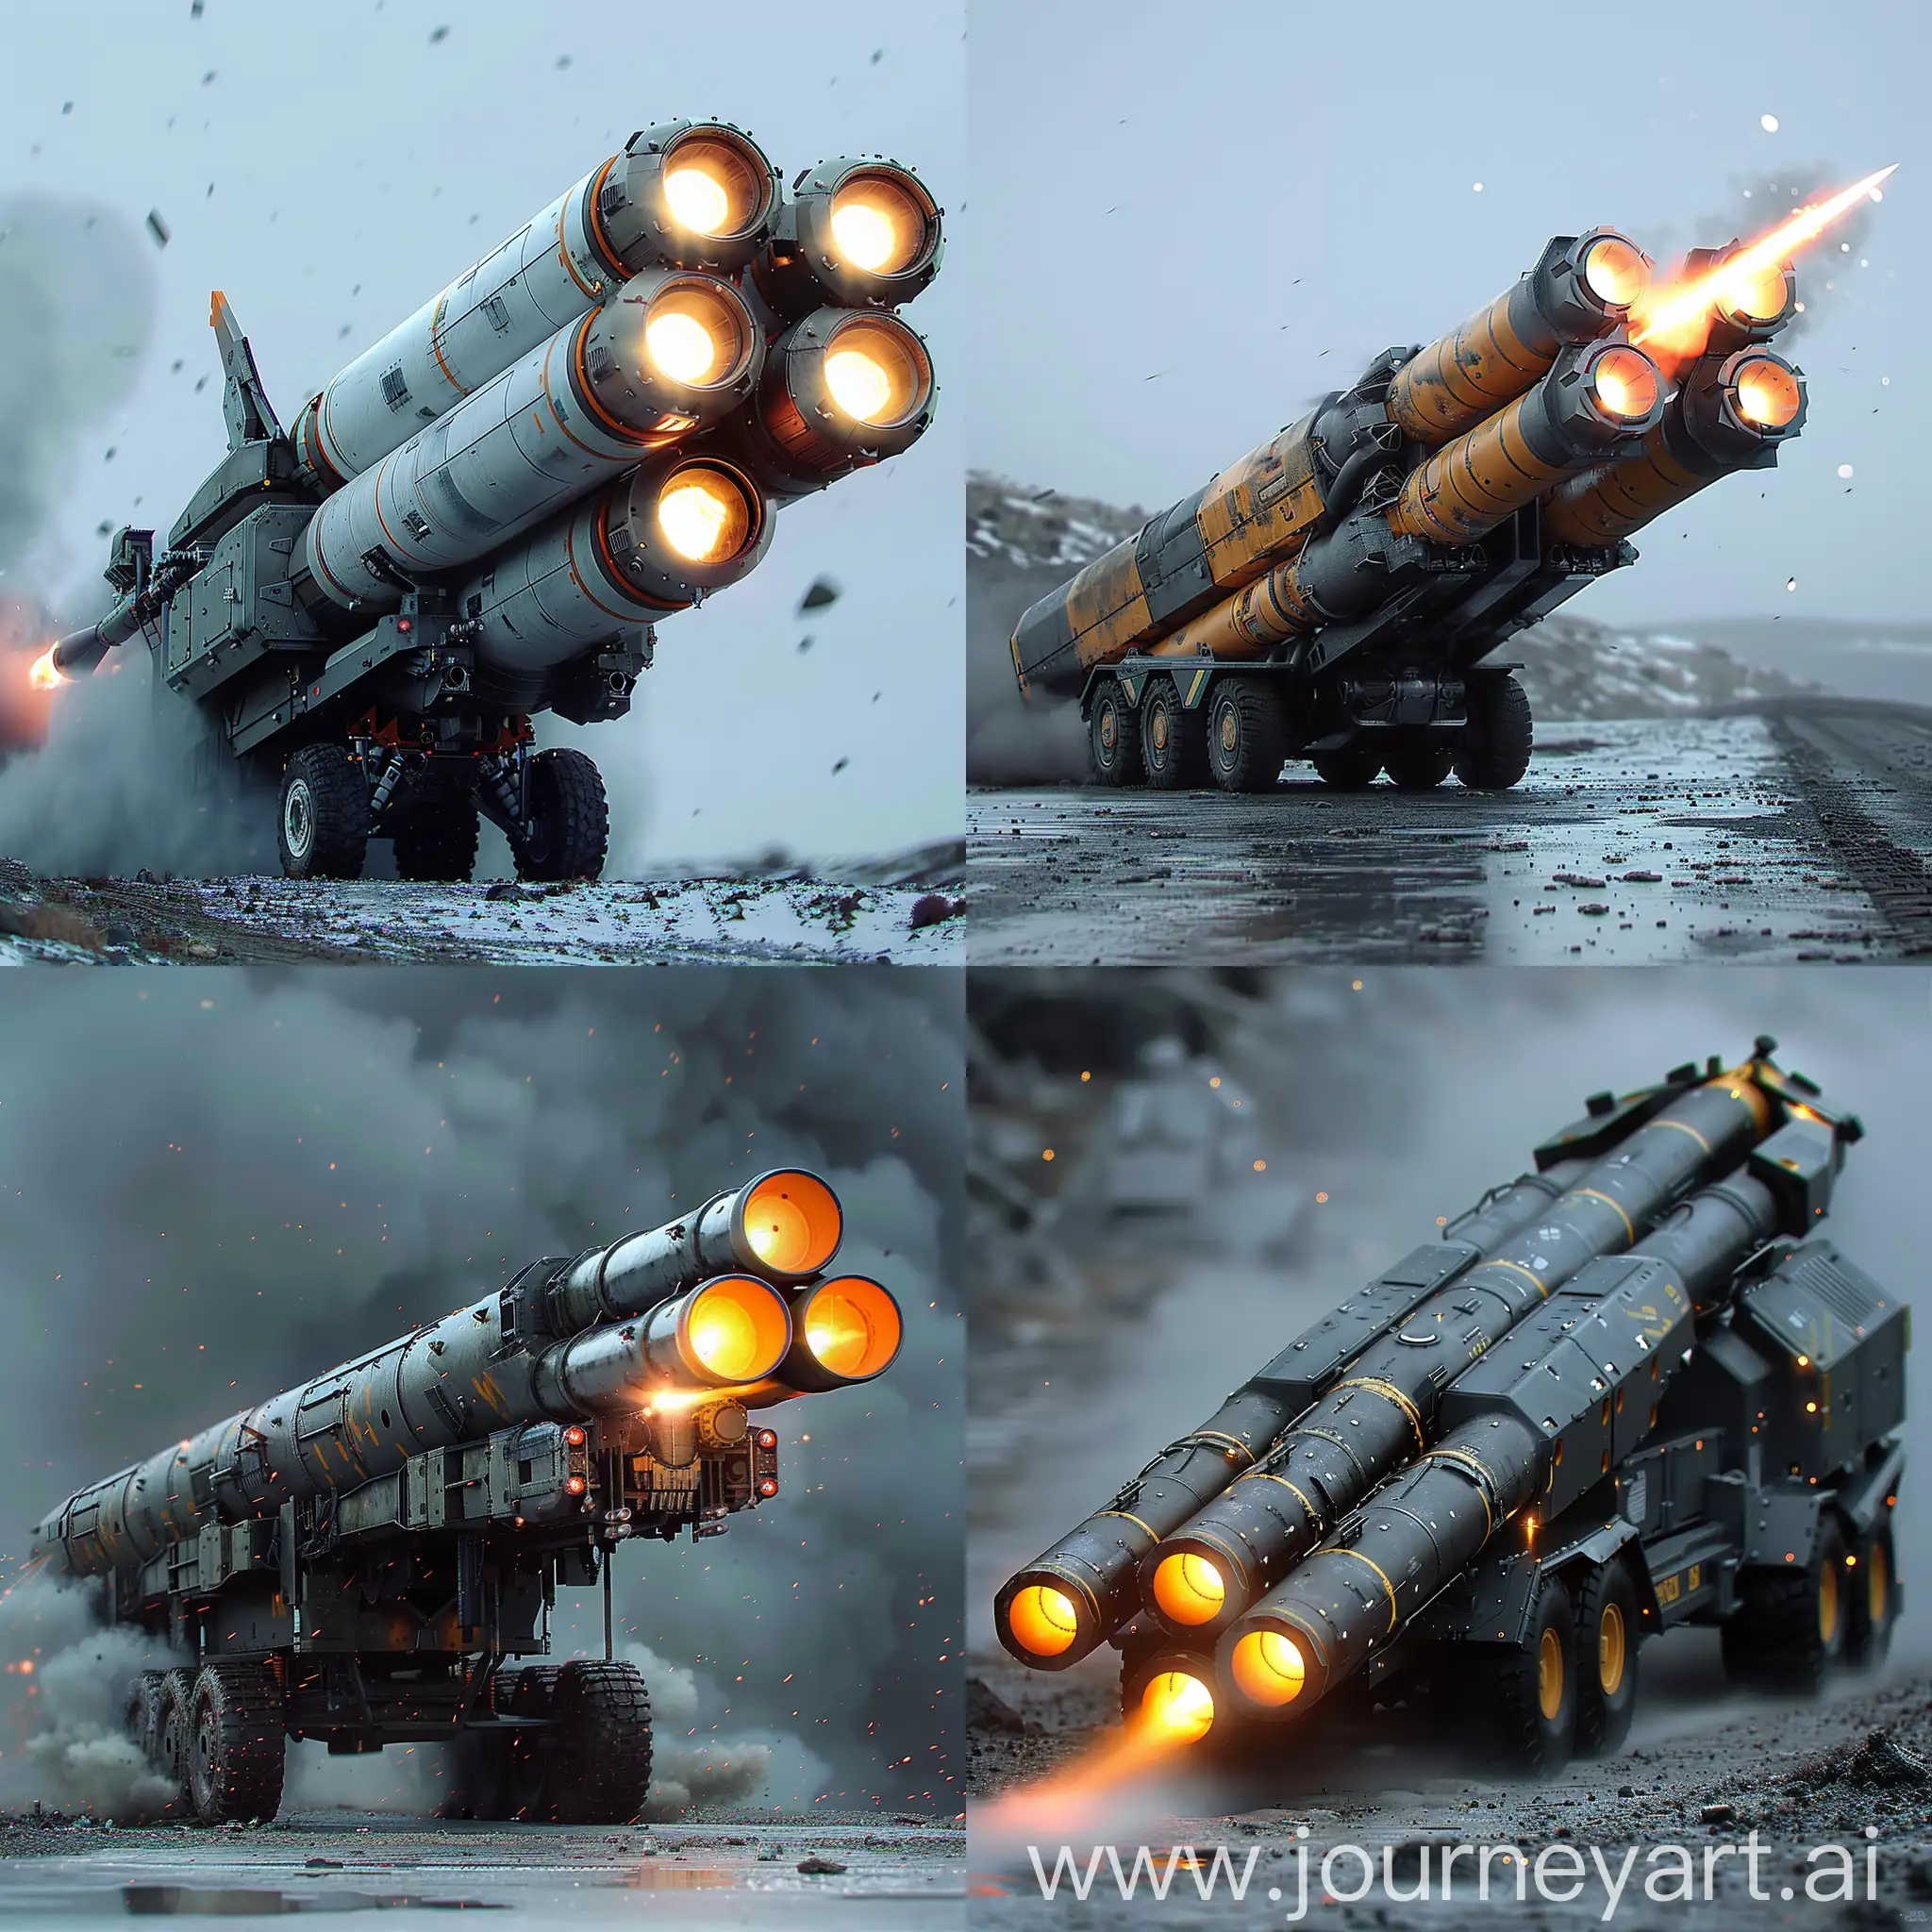 Advanced-Futuristic-Rocket-Launcher-with-Stealth-Technology-and-Quantum-Targeting